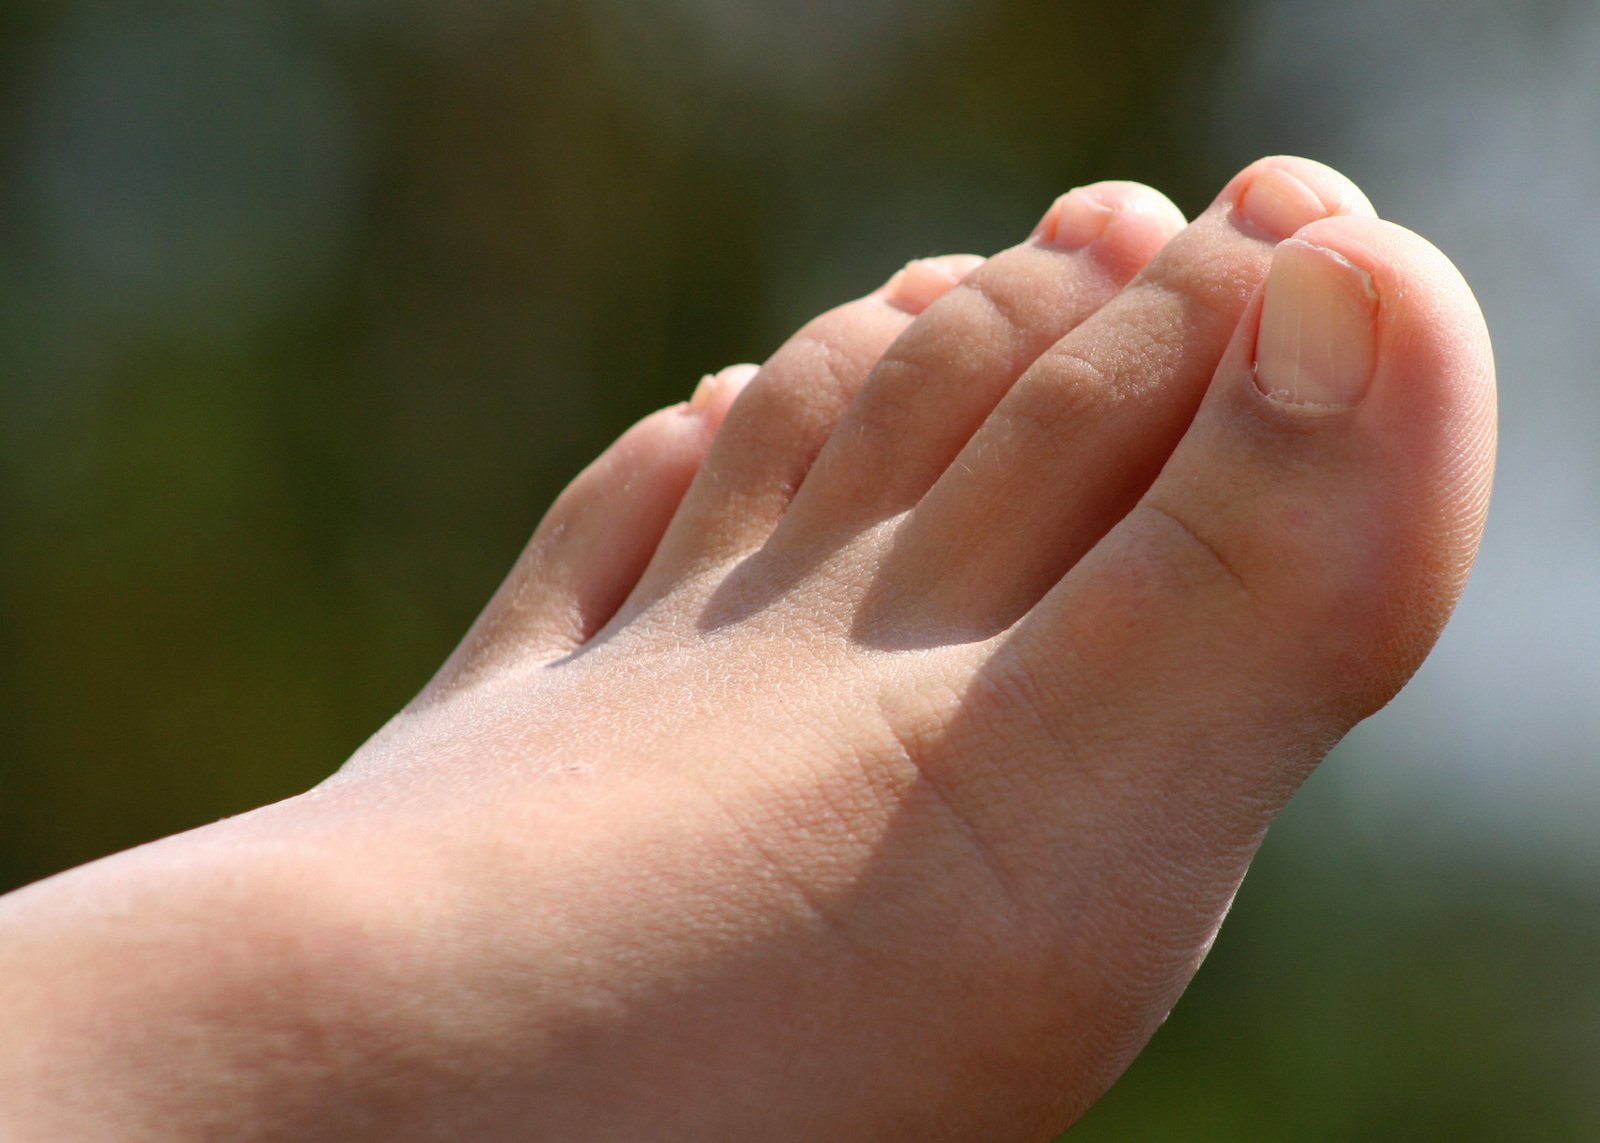 the foot and toes of a baby are shown in close up view